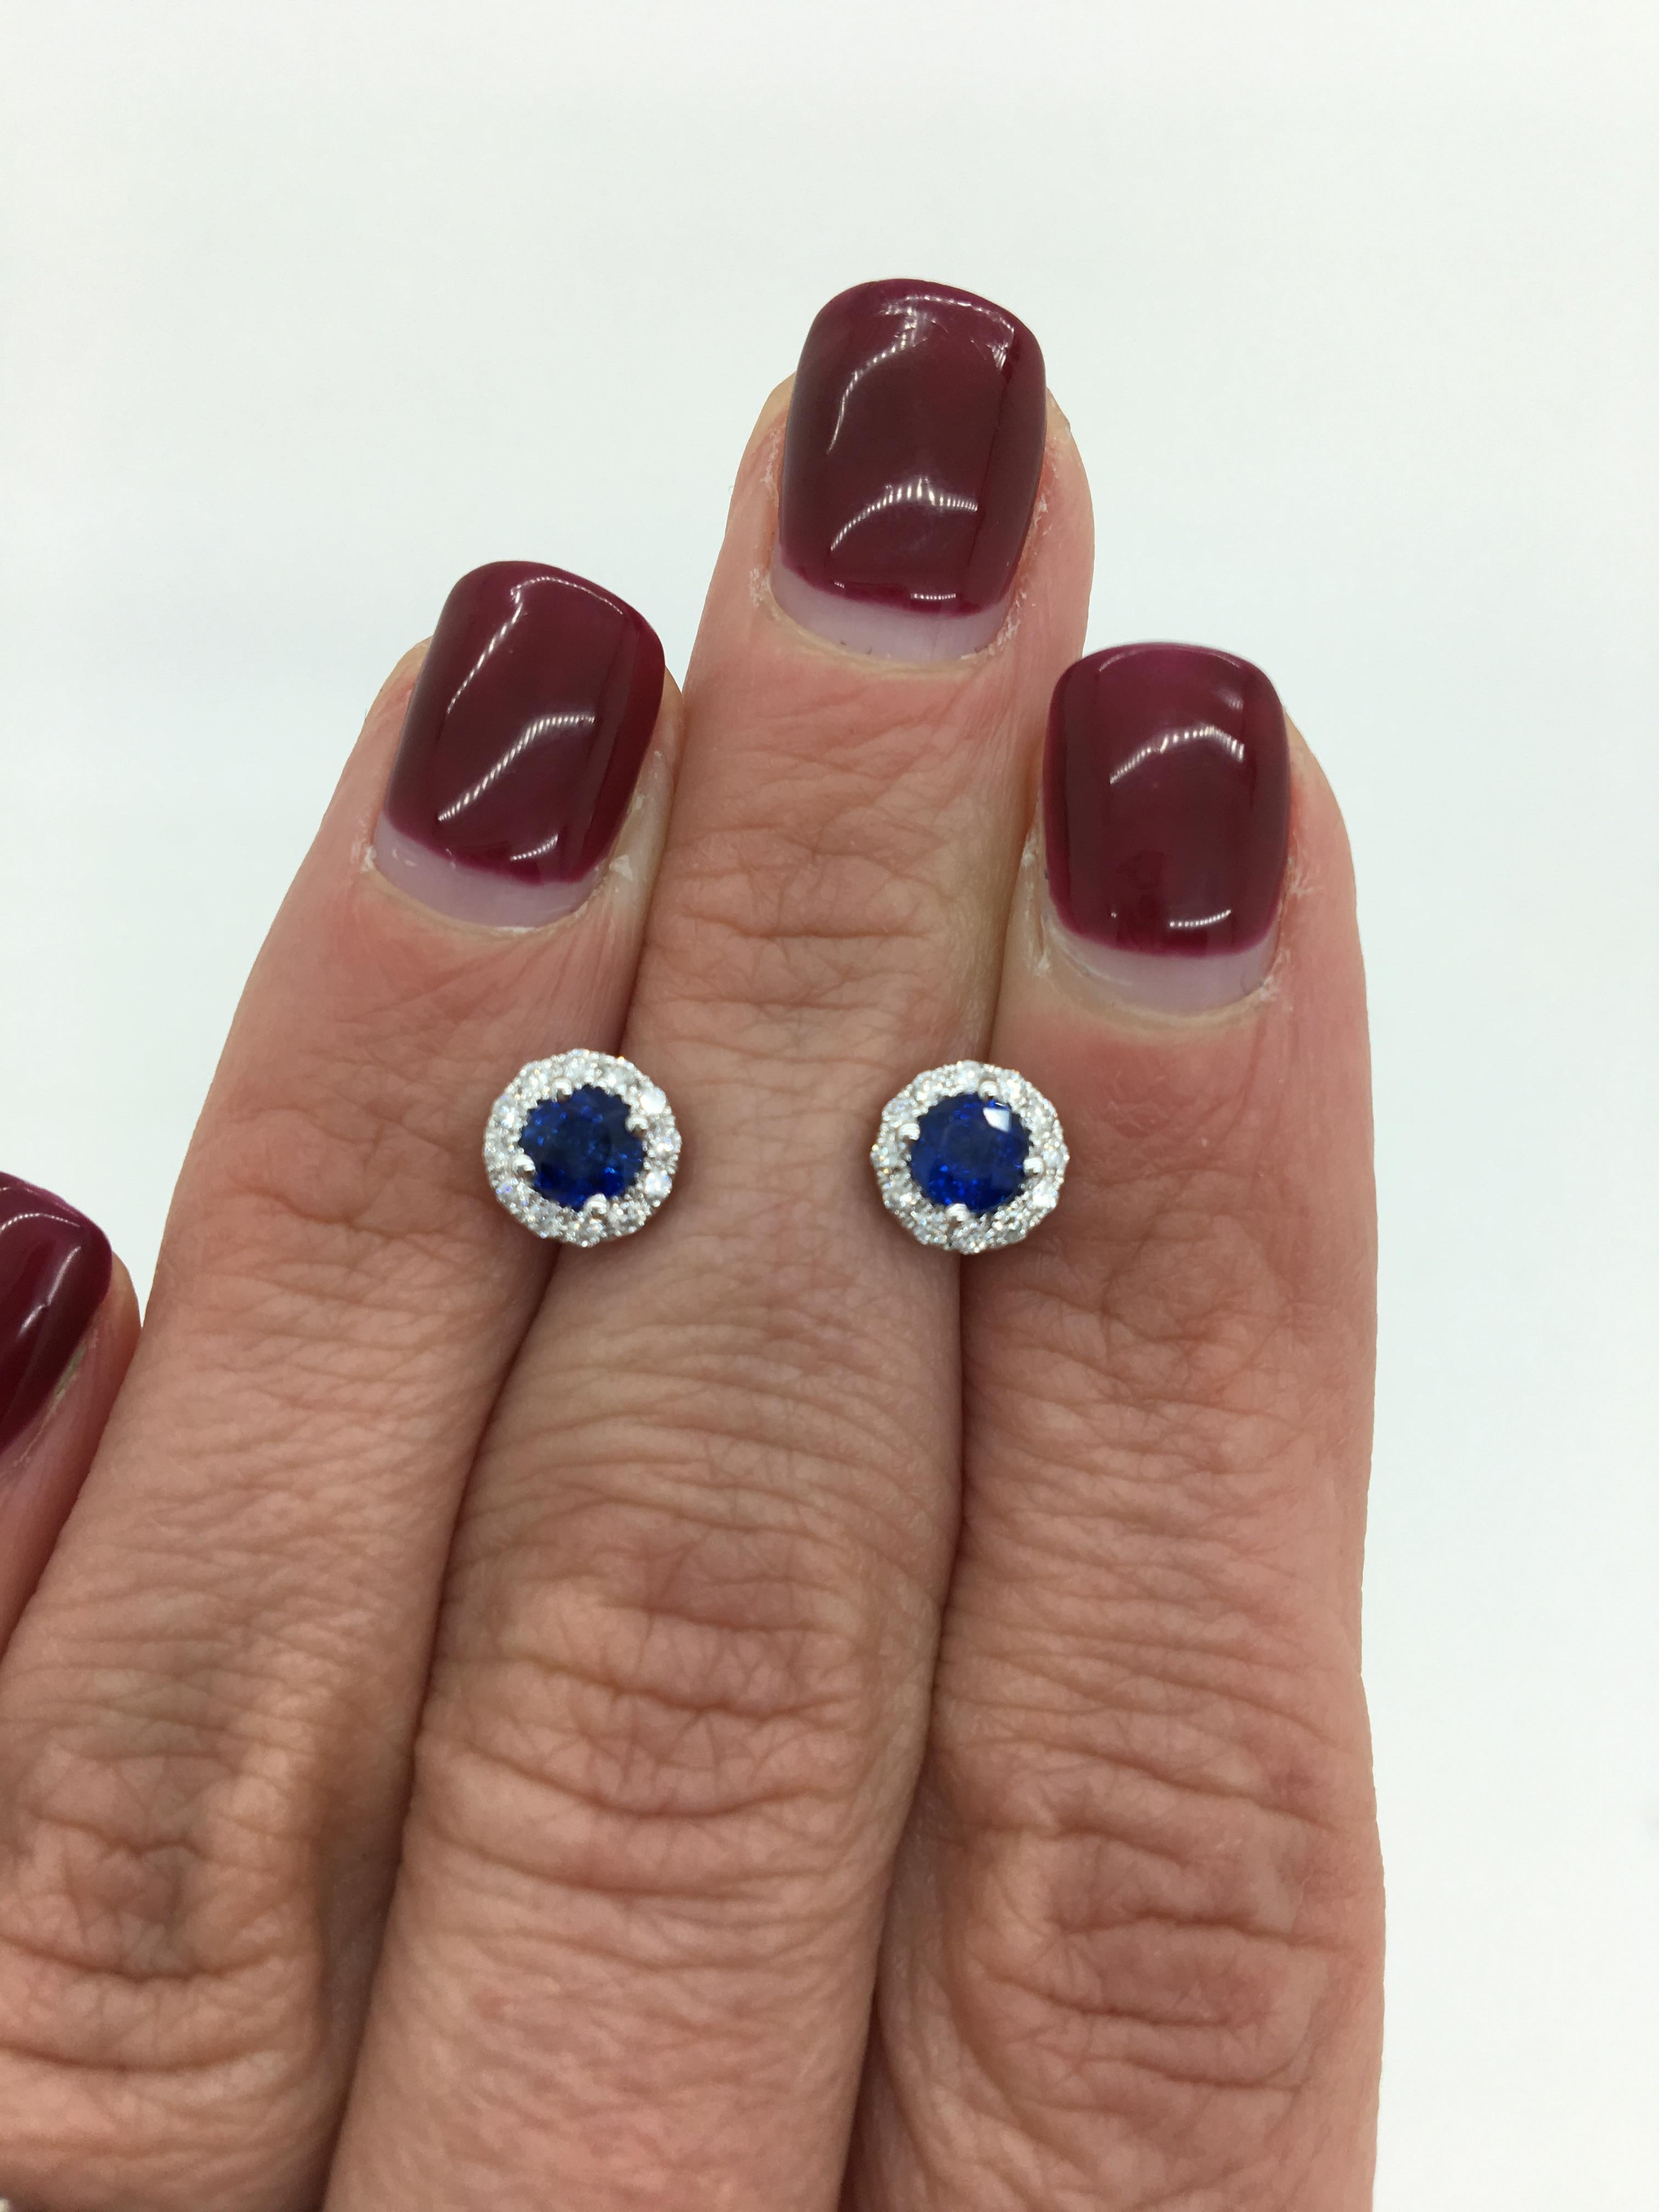 These halo style earrings feature two beautiful Blue Sapphires surrounded by .19CTW of Round Brilliant Cut Diamonds.

Gemstone: Diamond & Sapphire
Gemstone Carat Weight: .75CTW Round Cut Blue Sapphire
Diamond Carat Weight: Approximately